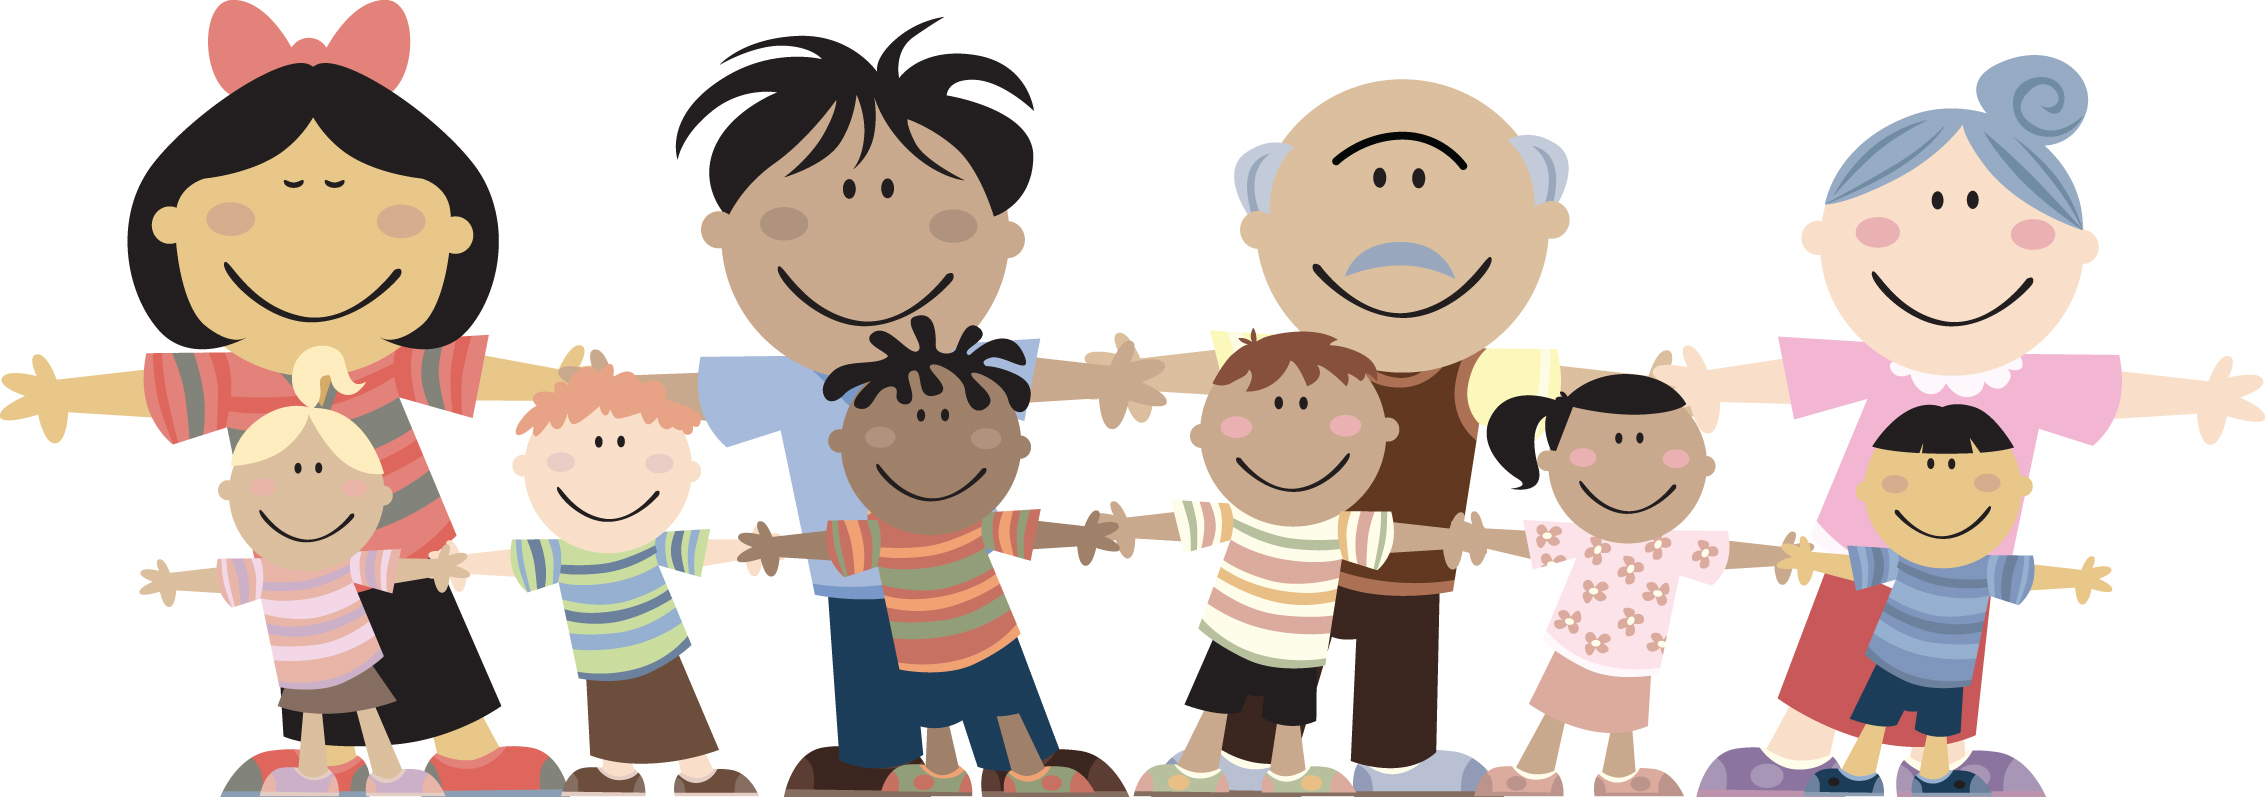 Family Cartoon Pictures - Clipart library